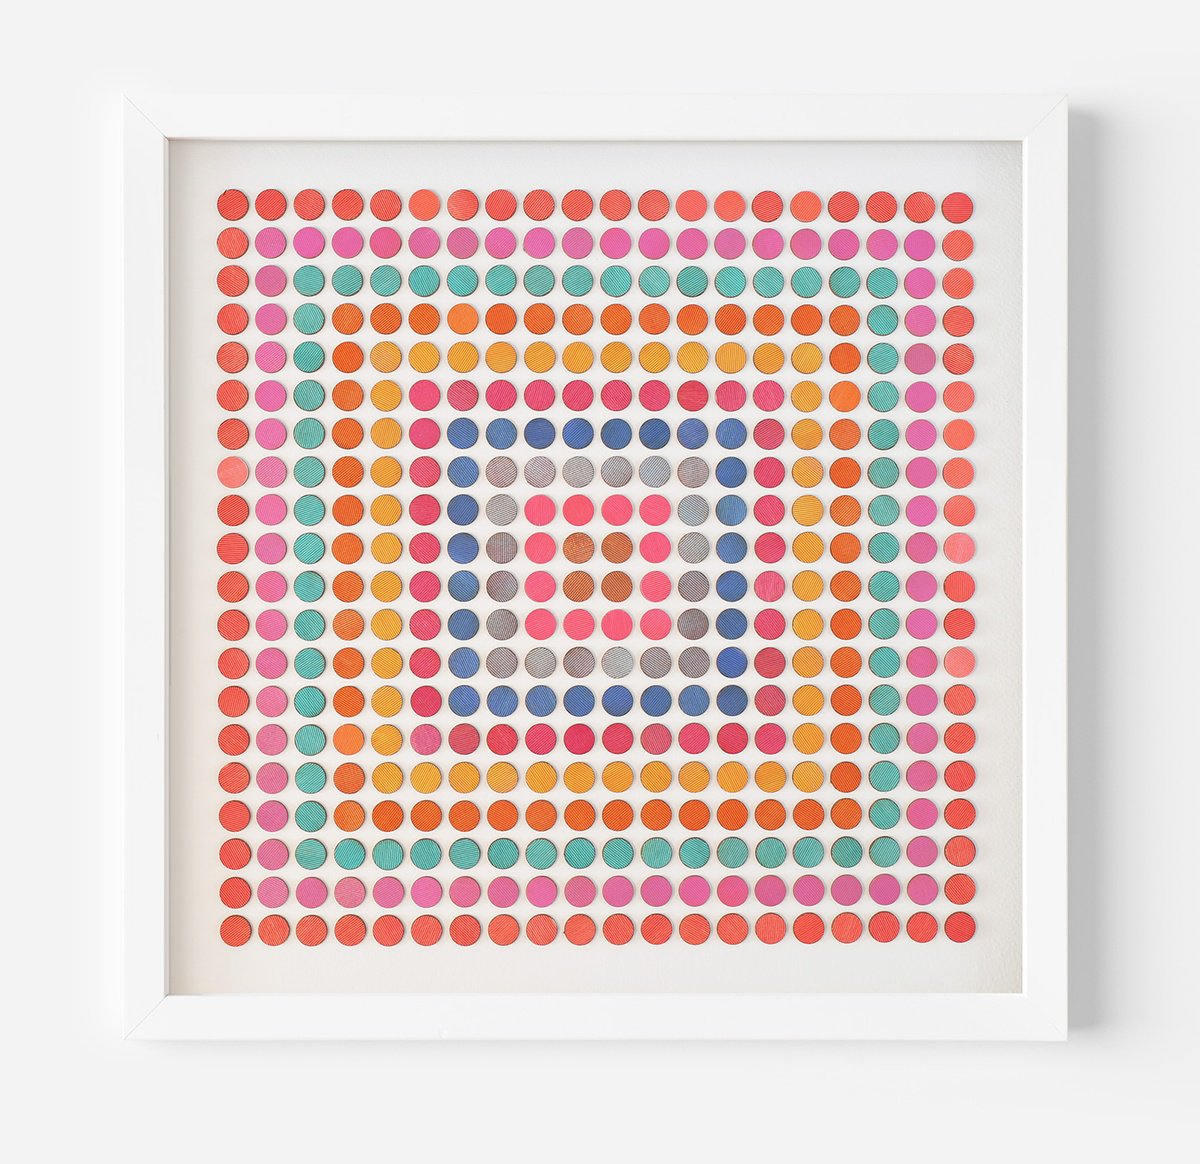 Abstract art wood dot collage ’concentric square of dots’ Red by Amelia Coward